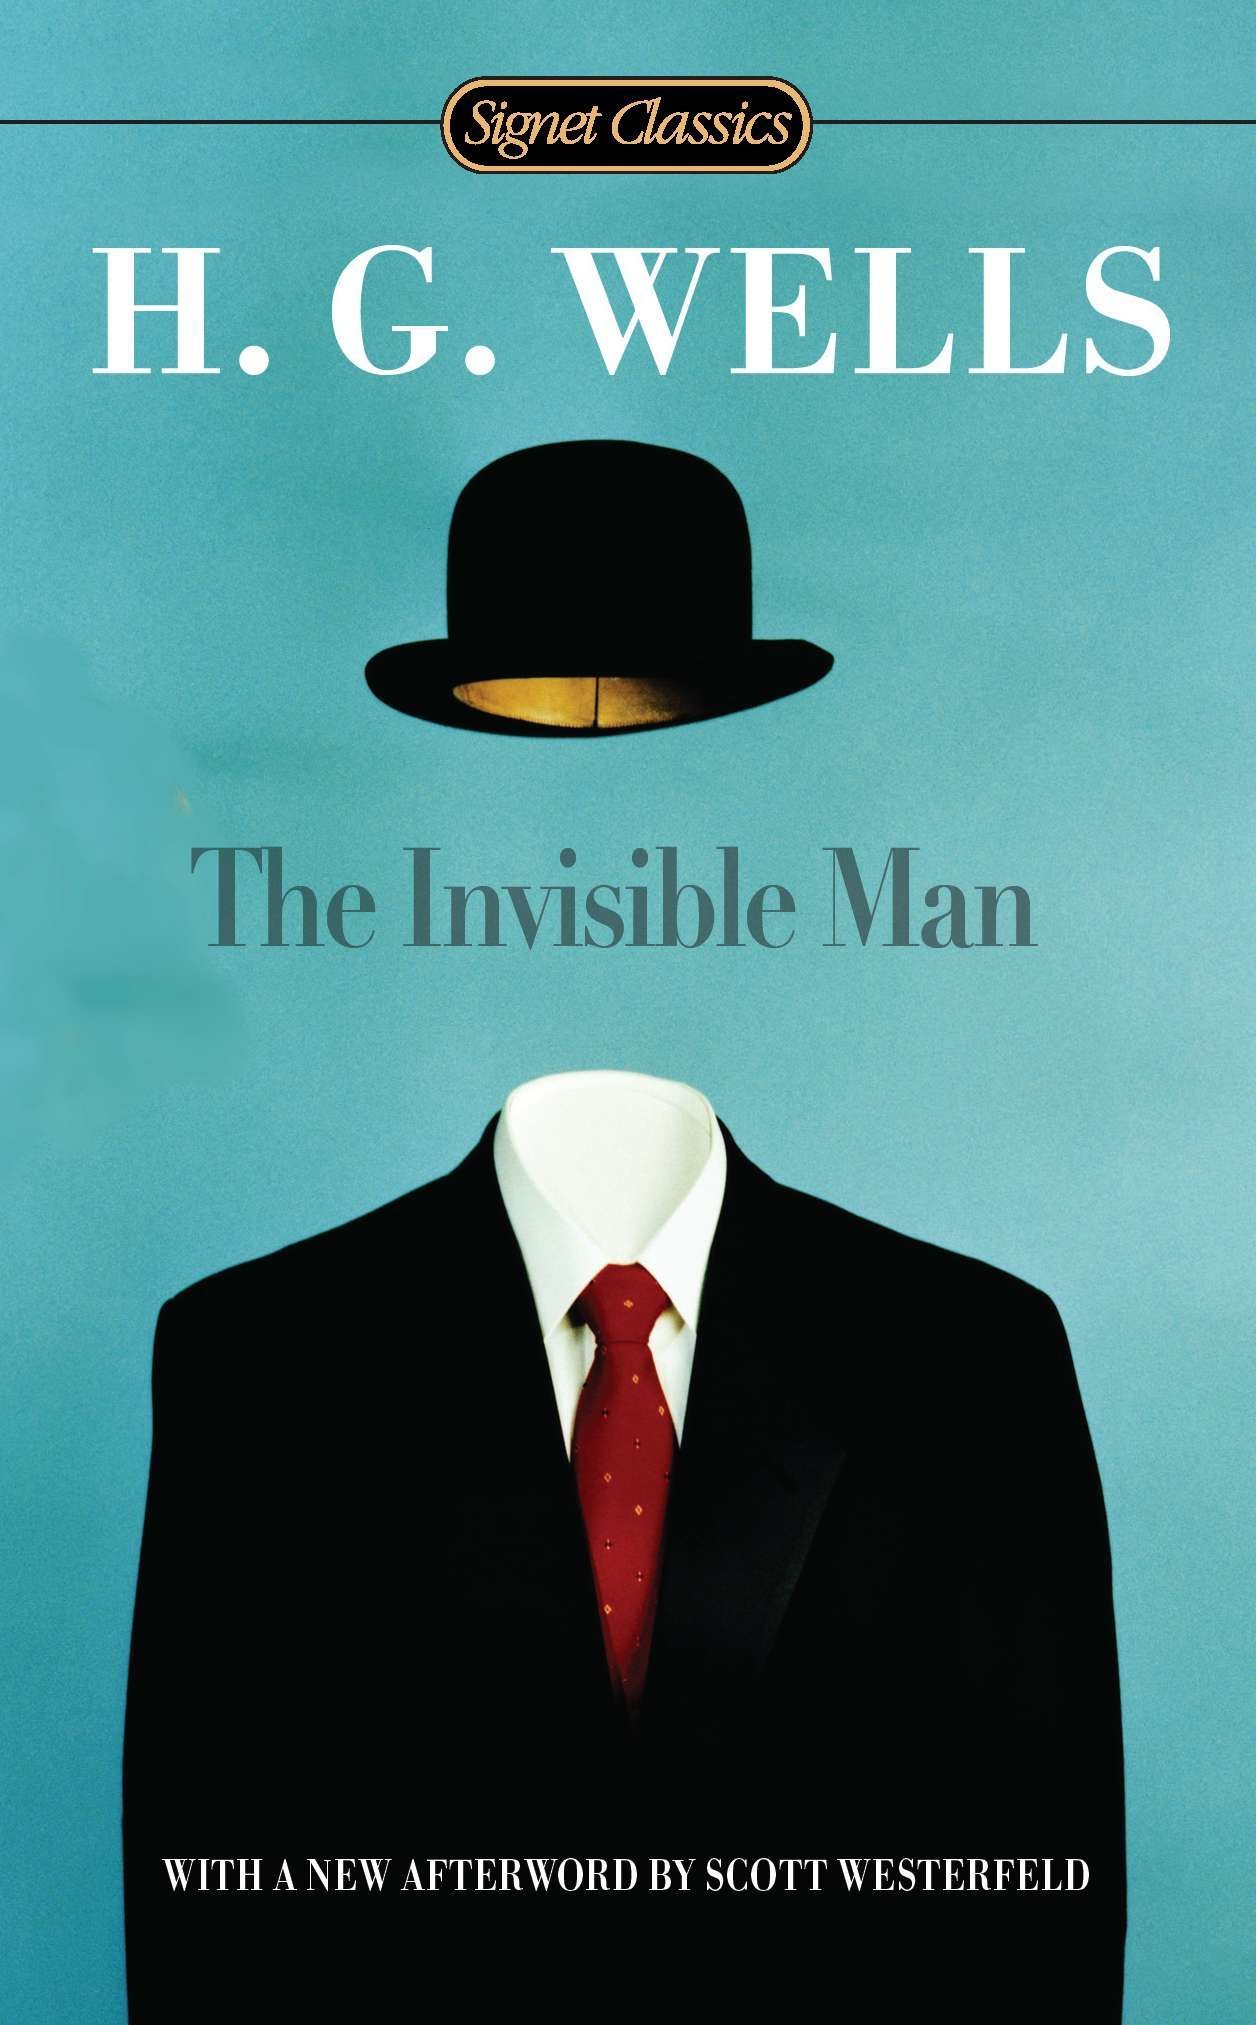 H. G. Wells: The invisible man (1998, McFarland & Co.)